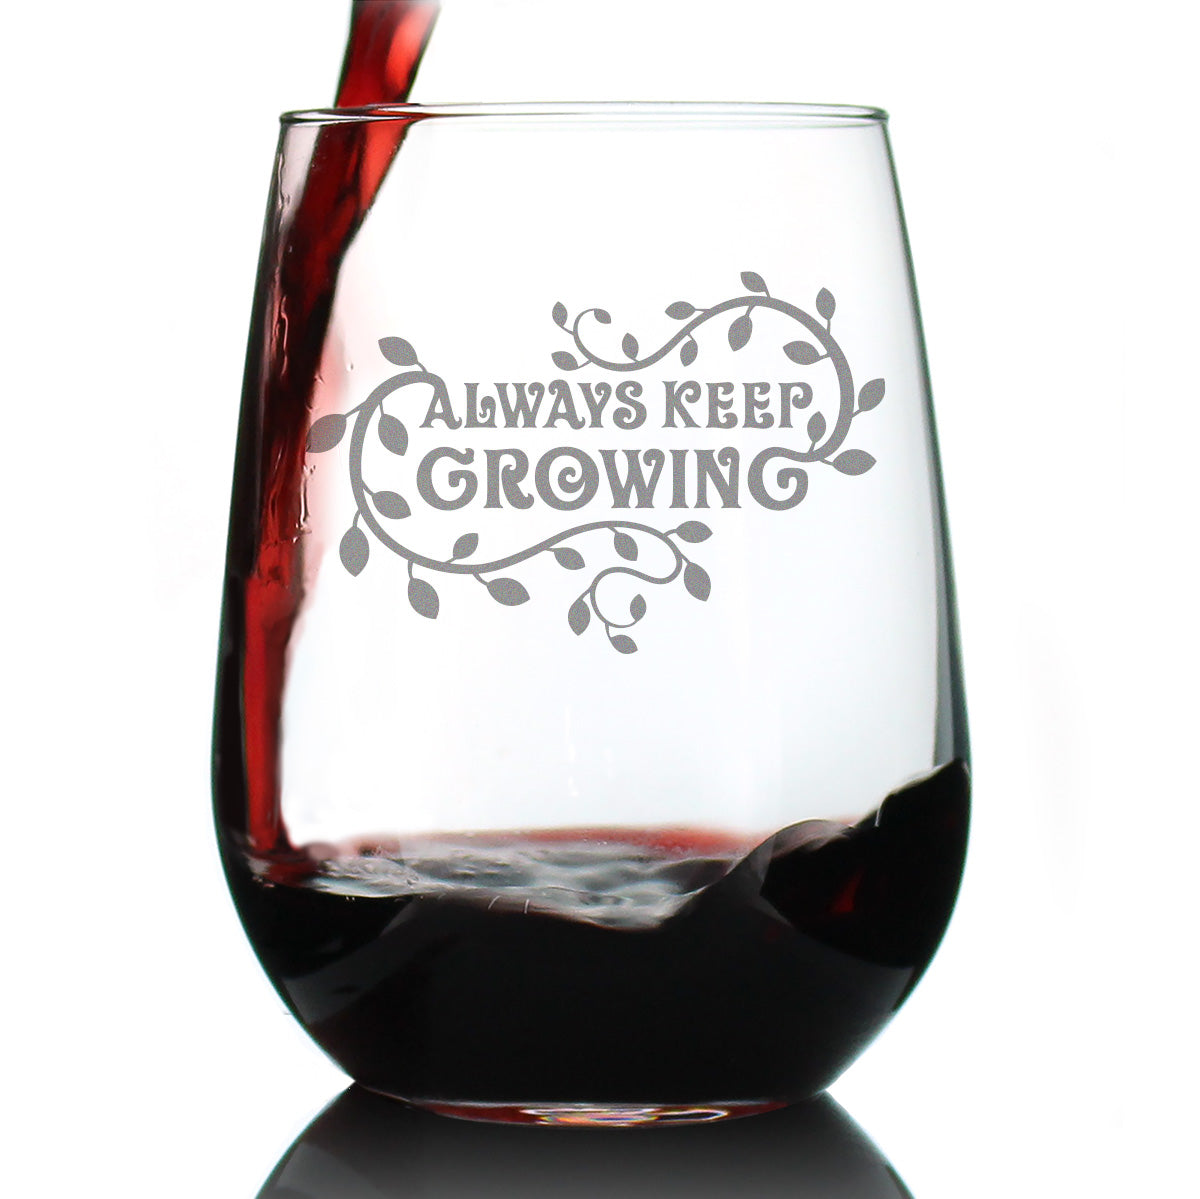 Keep Growing - Stemless Wine Glass - Gardening Themed Gifts and Decor for Gardeners - Large 17 Oz Glass